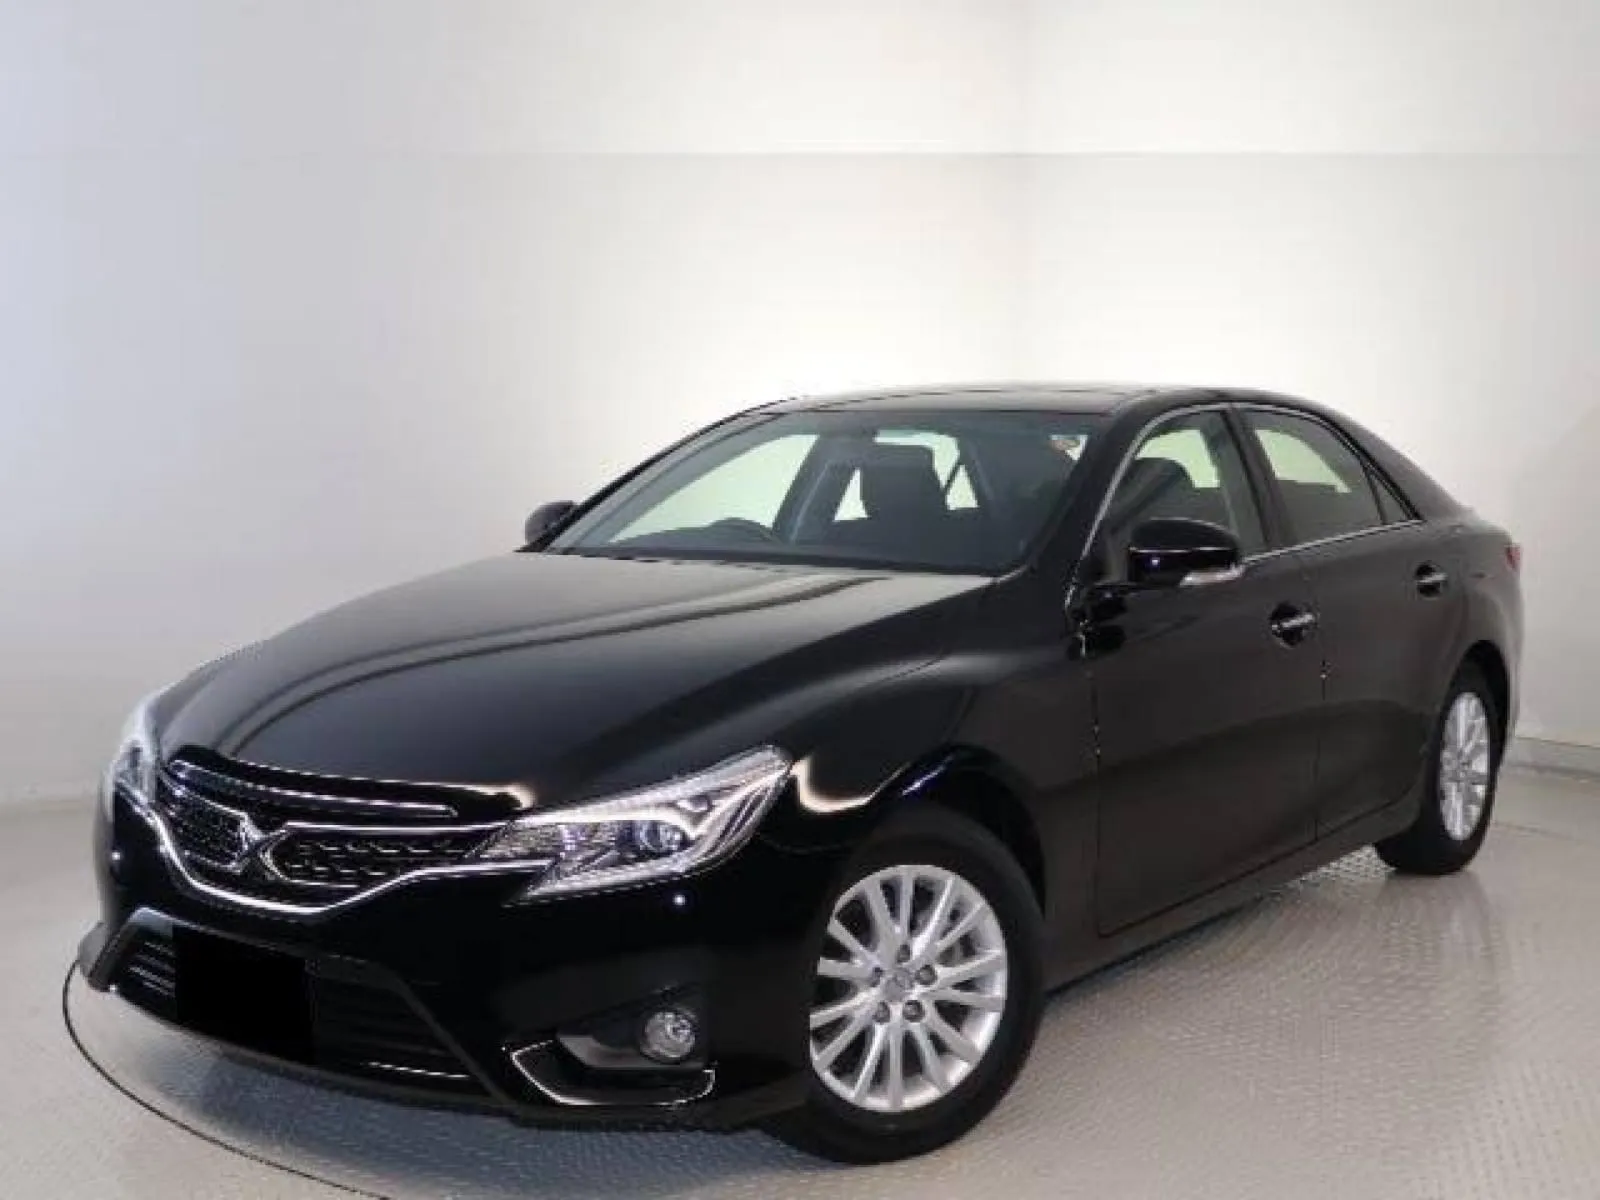 Toyota MARK X For Hire Lease Rental in Kenya Best prices all cars available